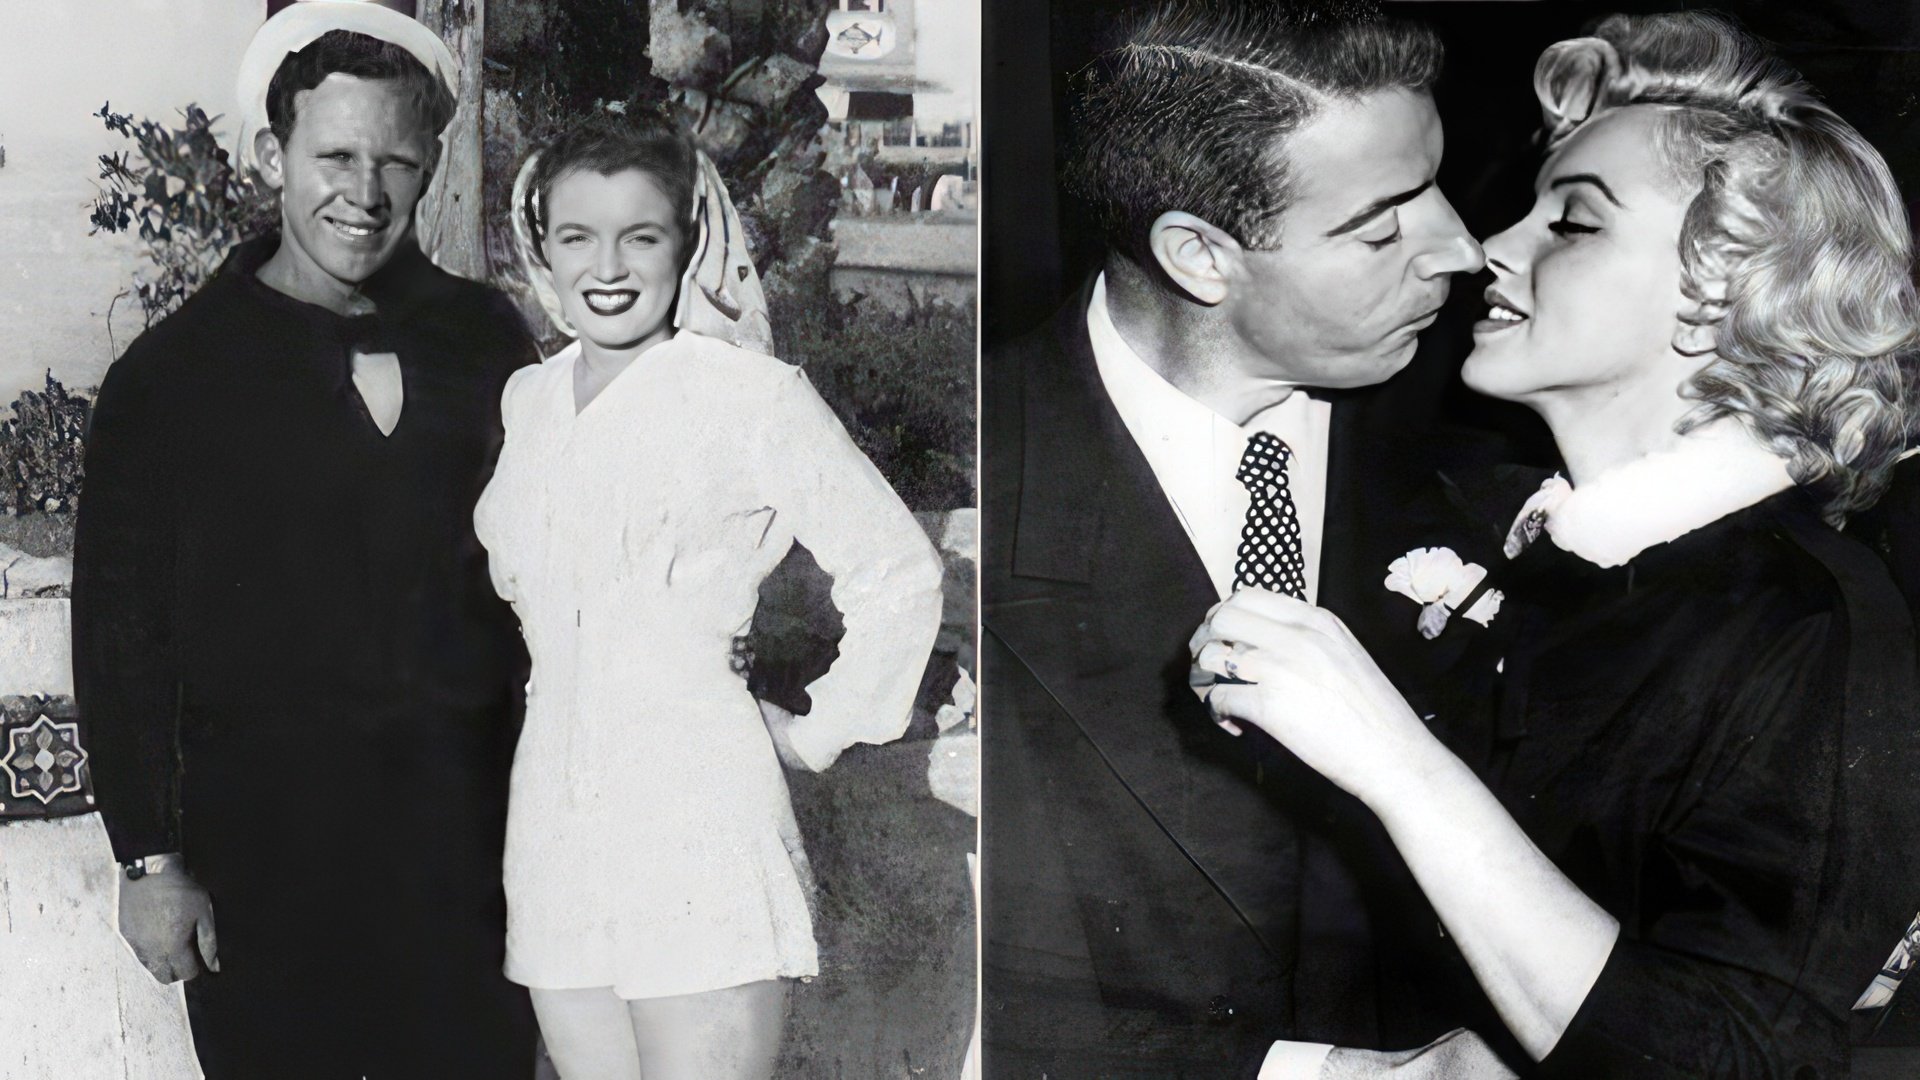 Marilyn Monroe and her former husbands: James Dougherty (left) and Joe DiMaggio (right)